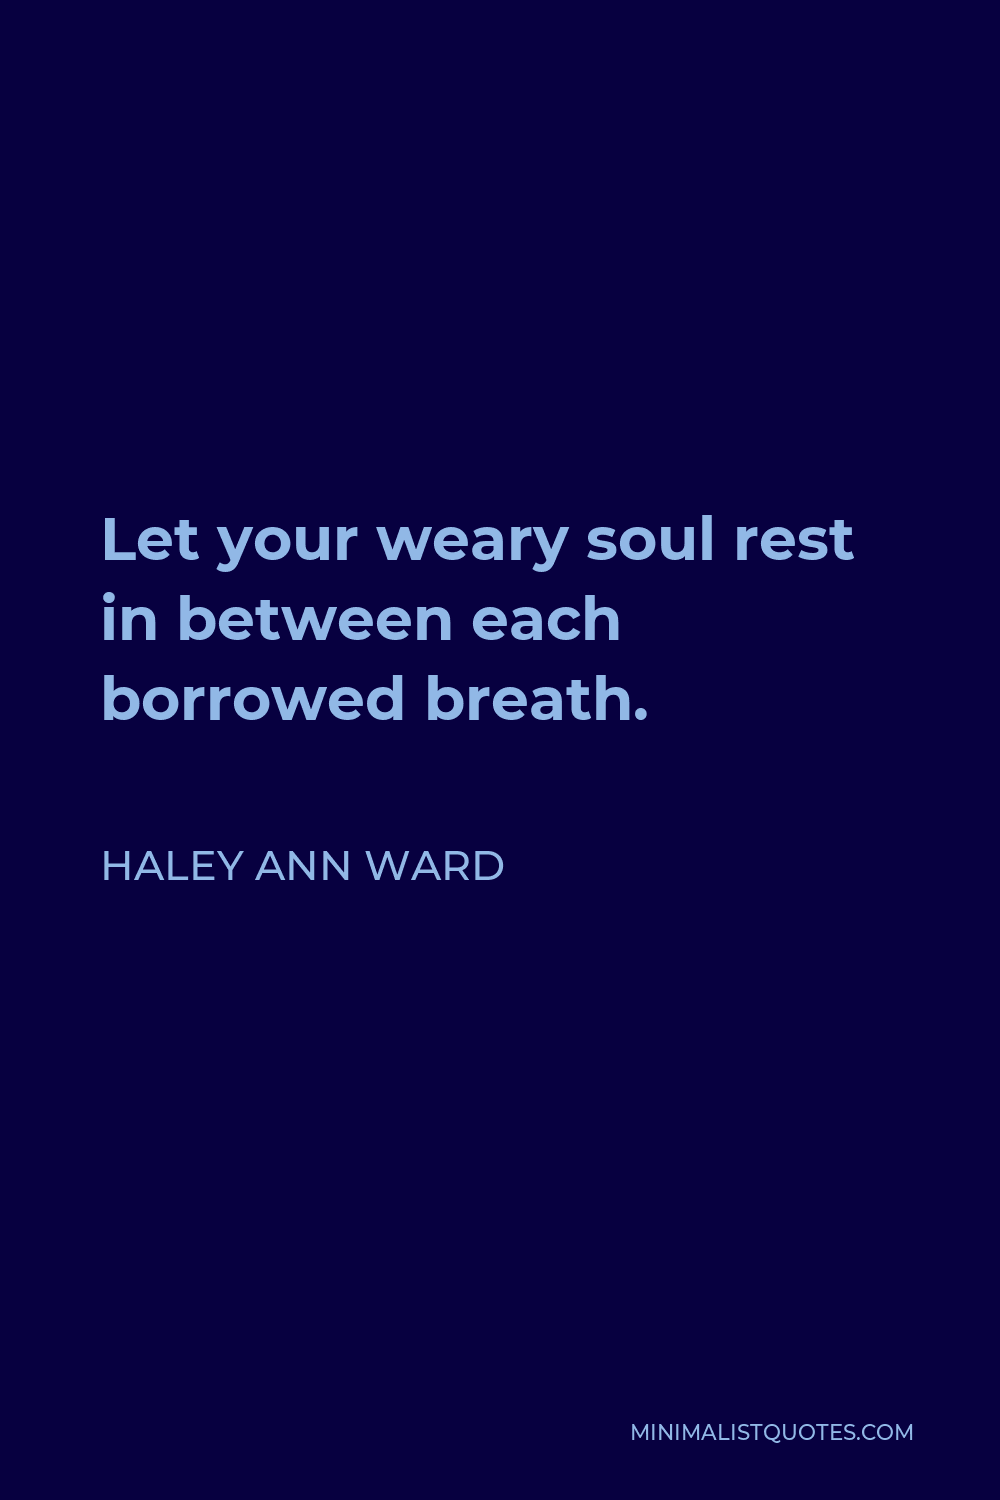 Haley Ann Ward Quote - Let your weary soul rest in between each borrowed breath.